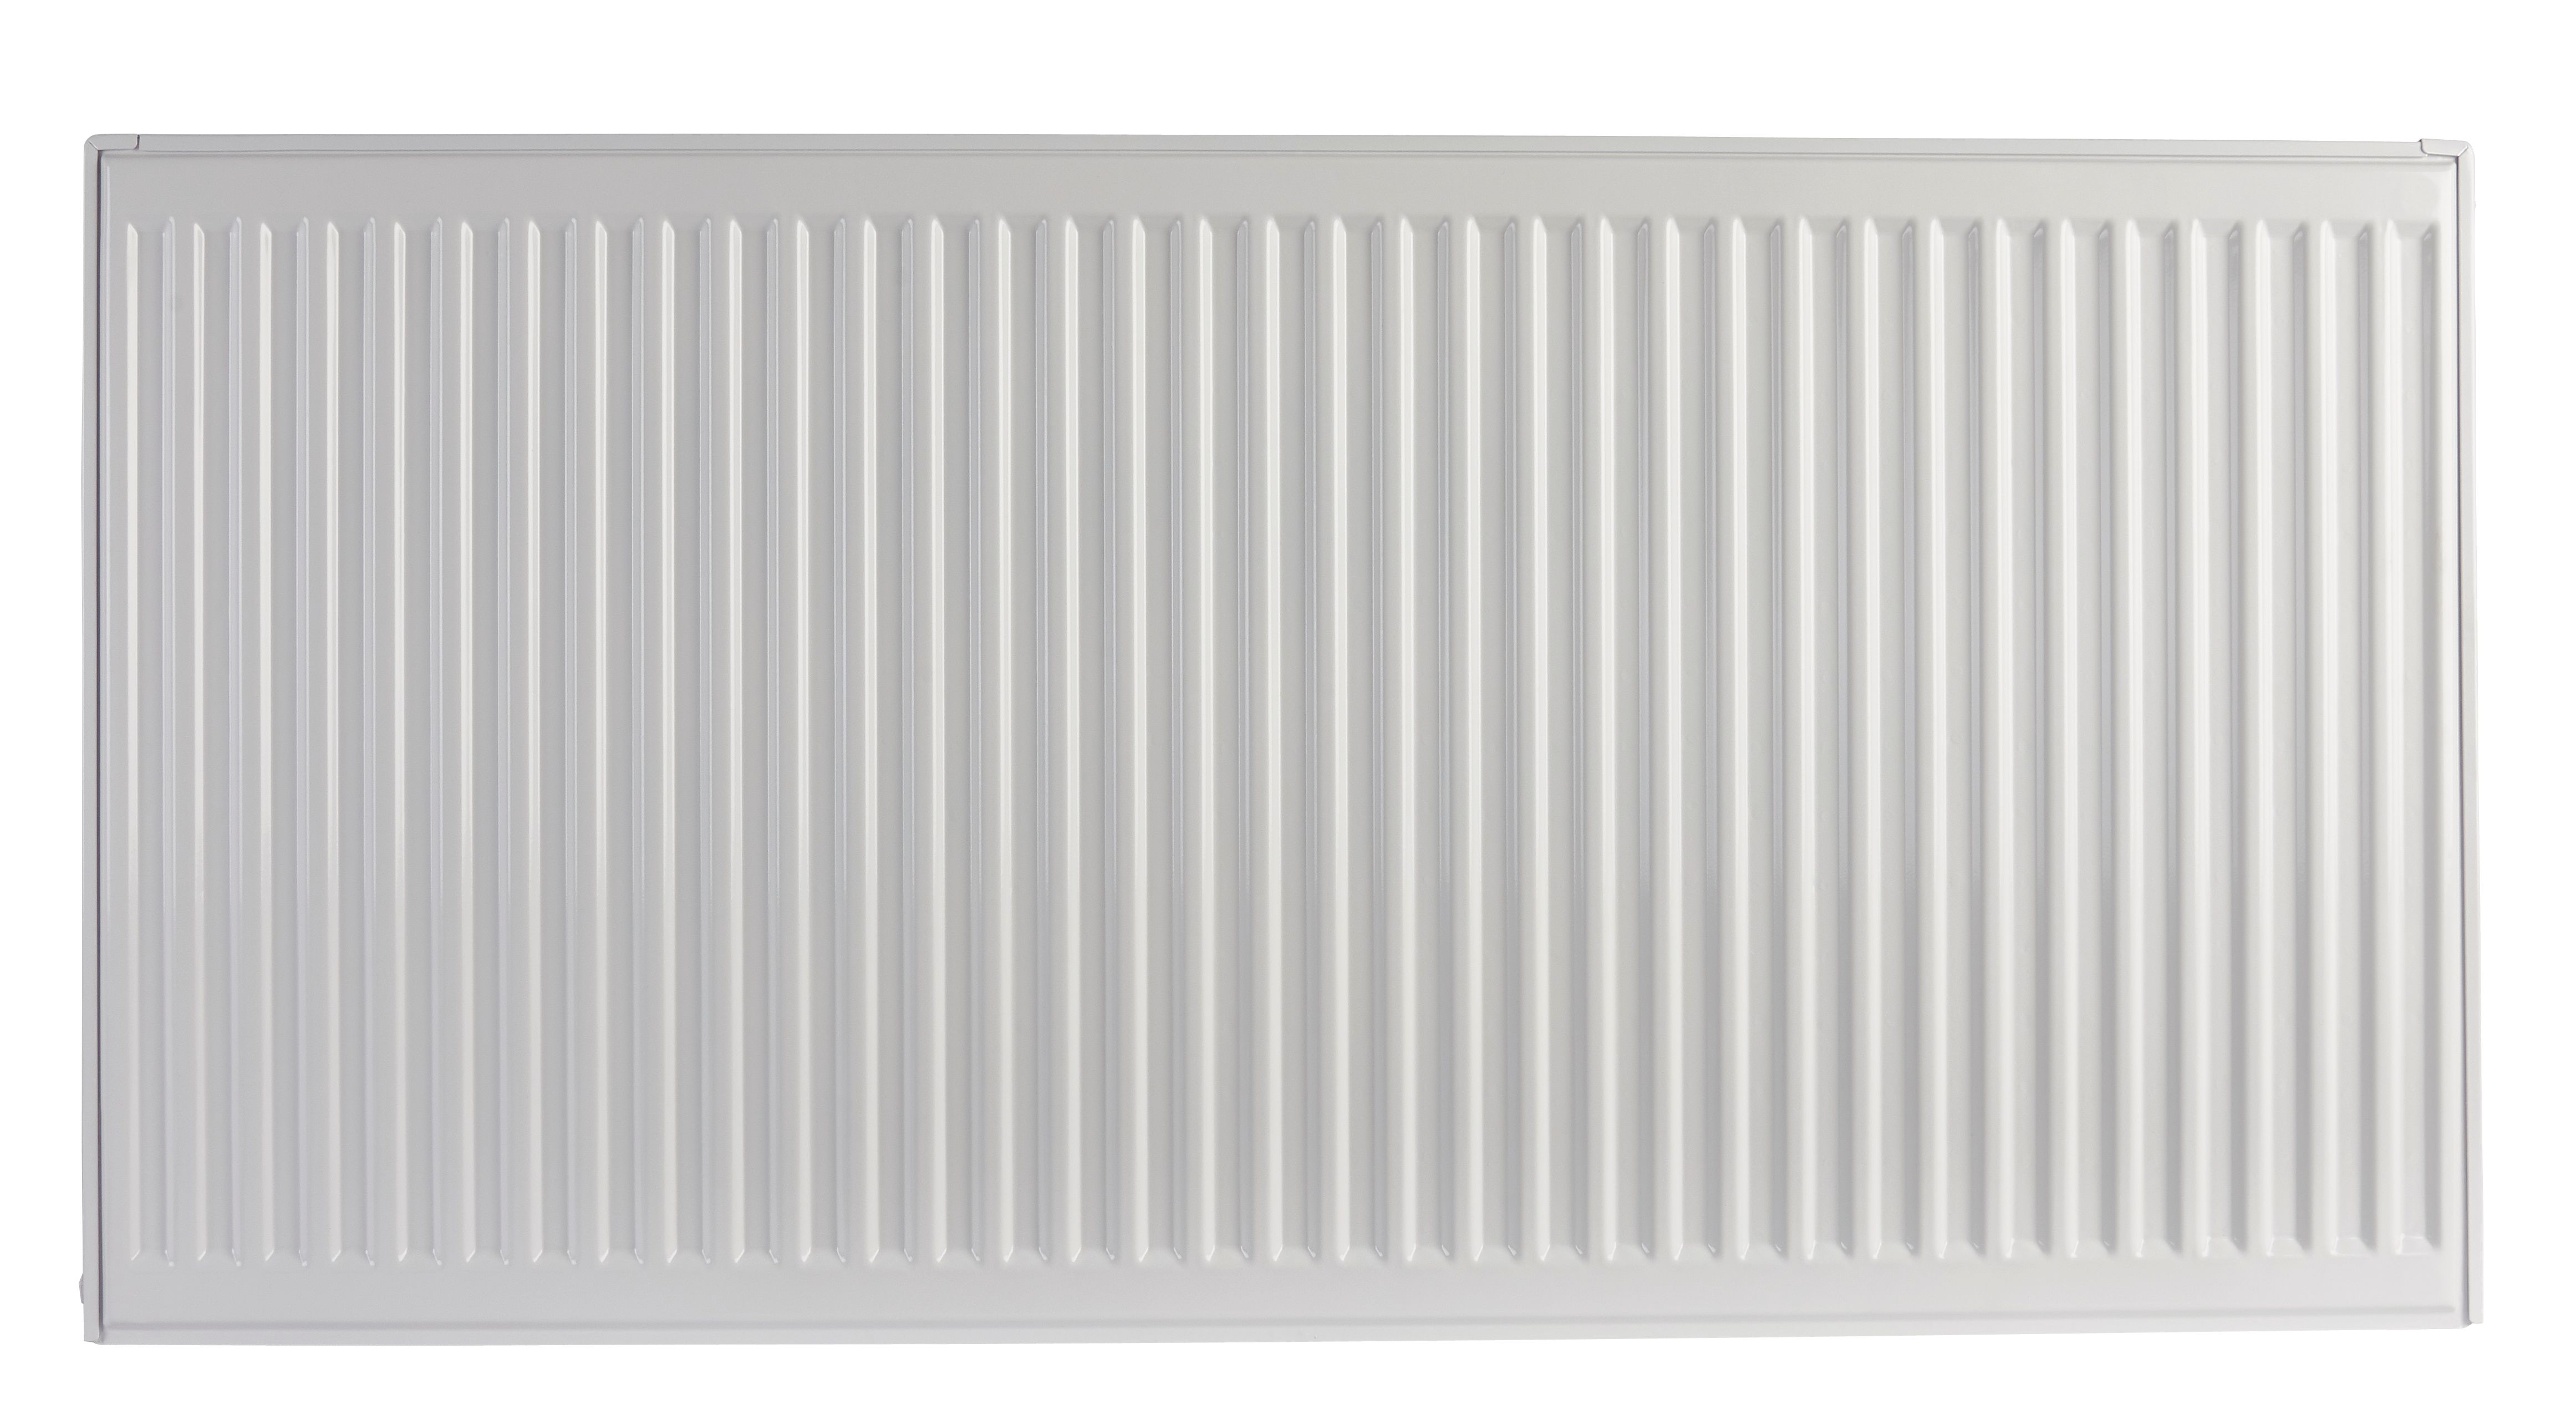 Image of Homeline by Stelrad 600 x 800mm Type 21 Double Panel Plus Single Convector Radiator